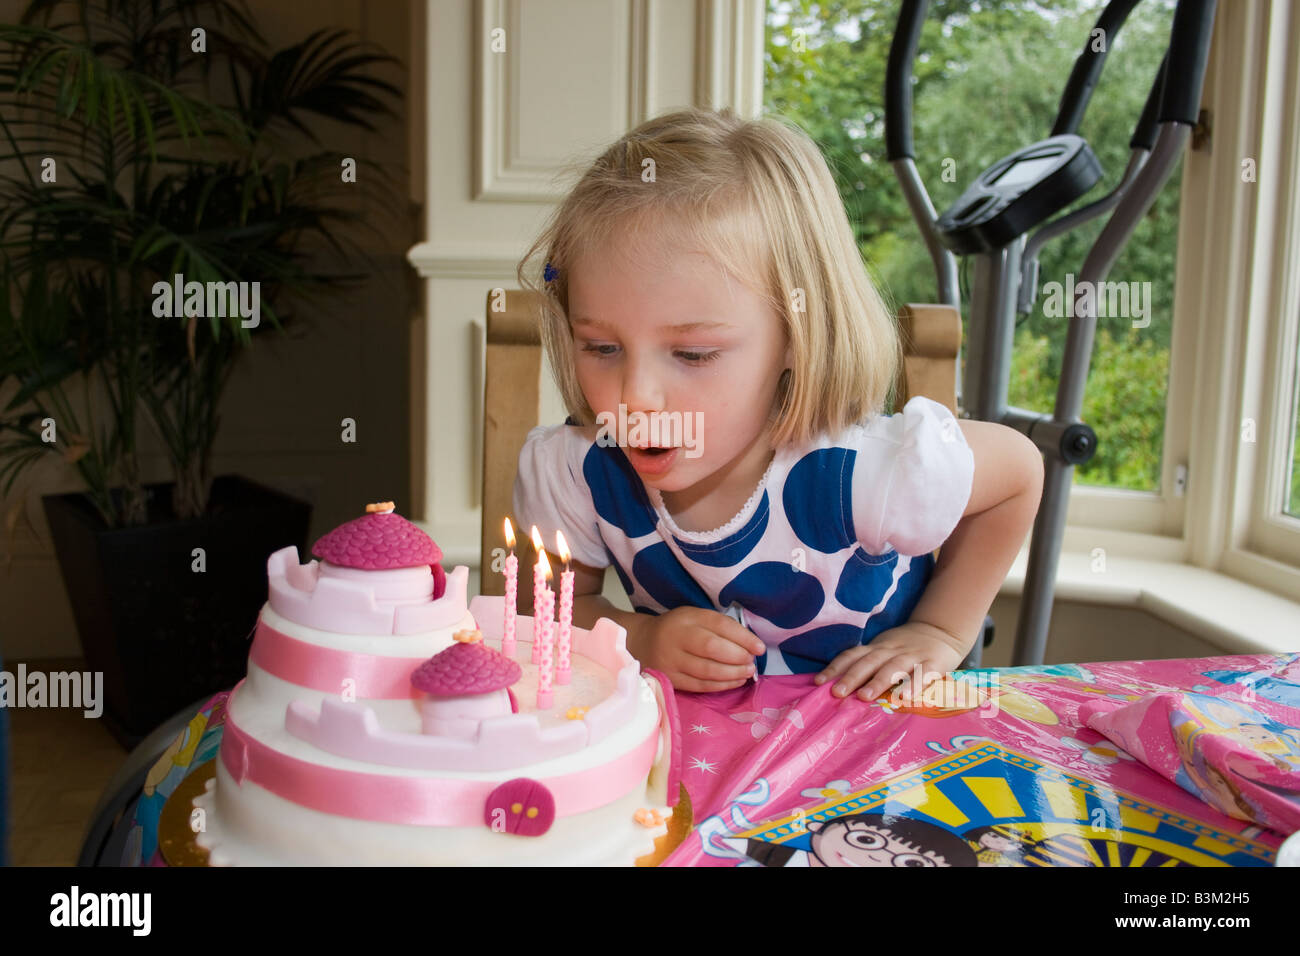 UK 4 year old girl blowing out candles on cake Banque D'Images